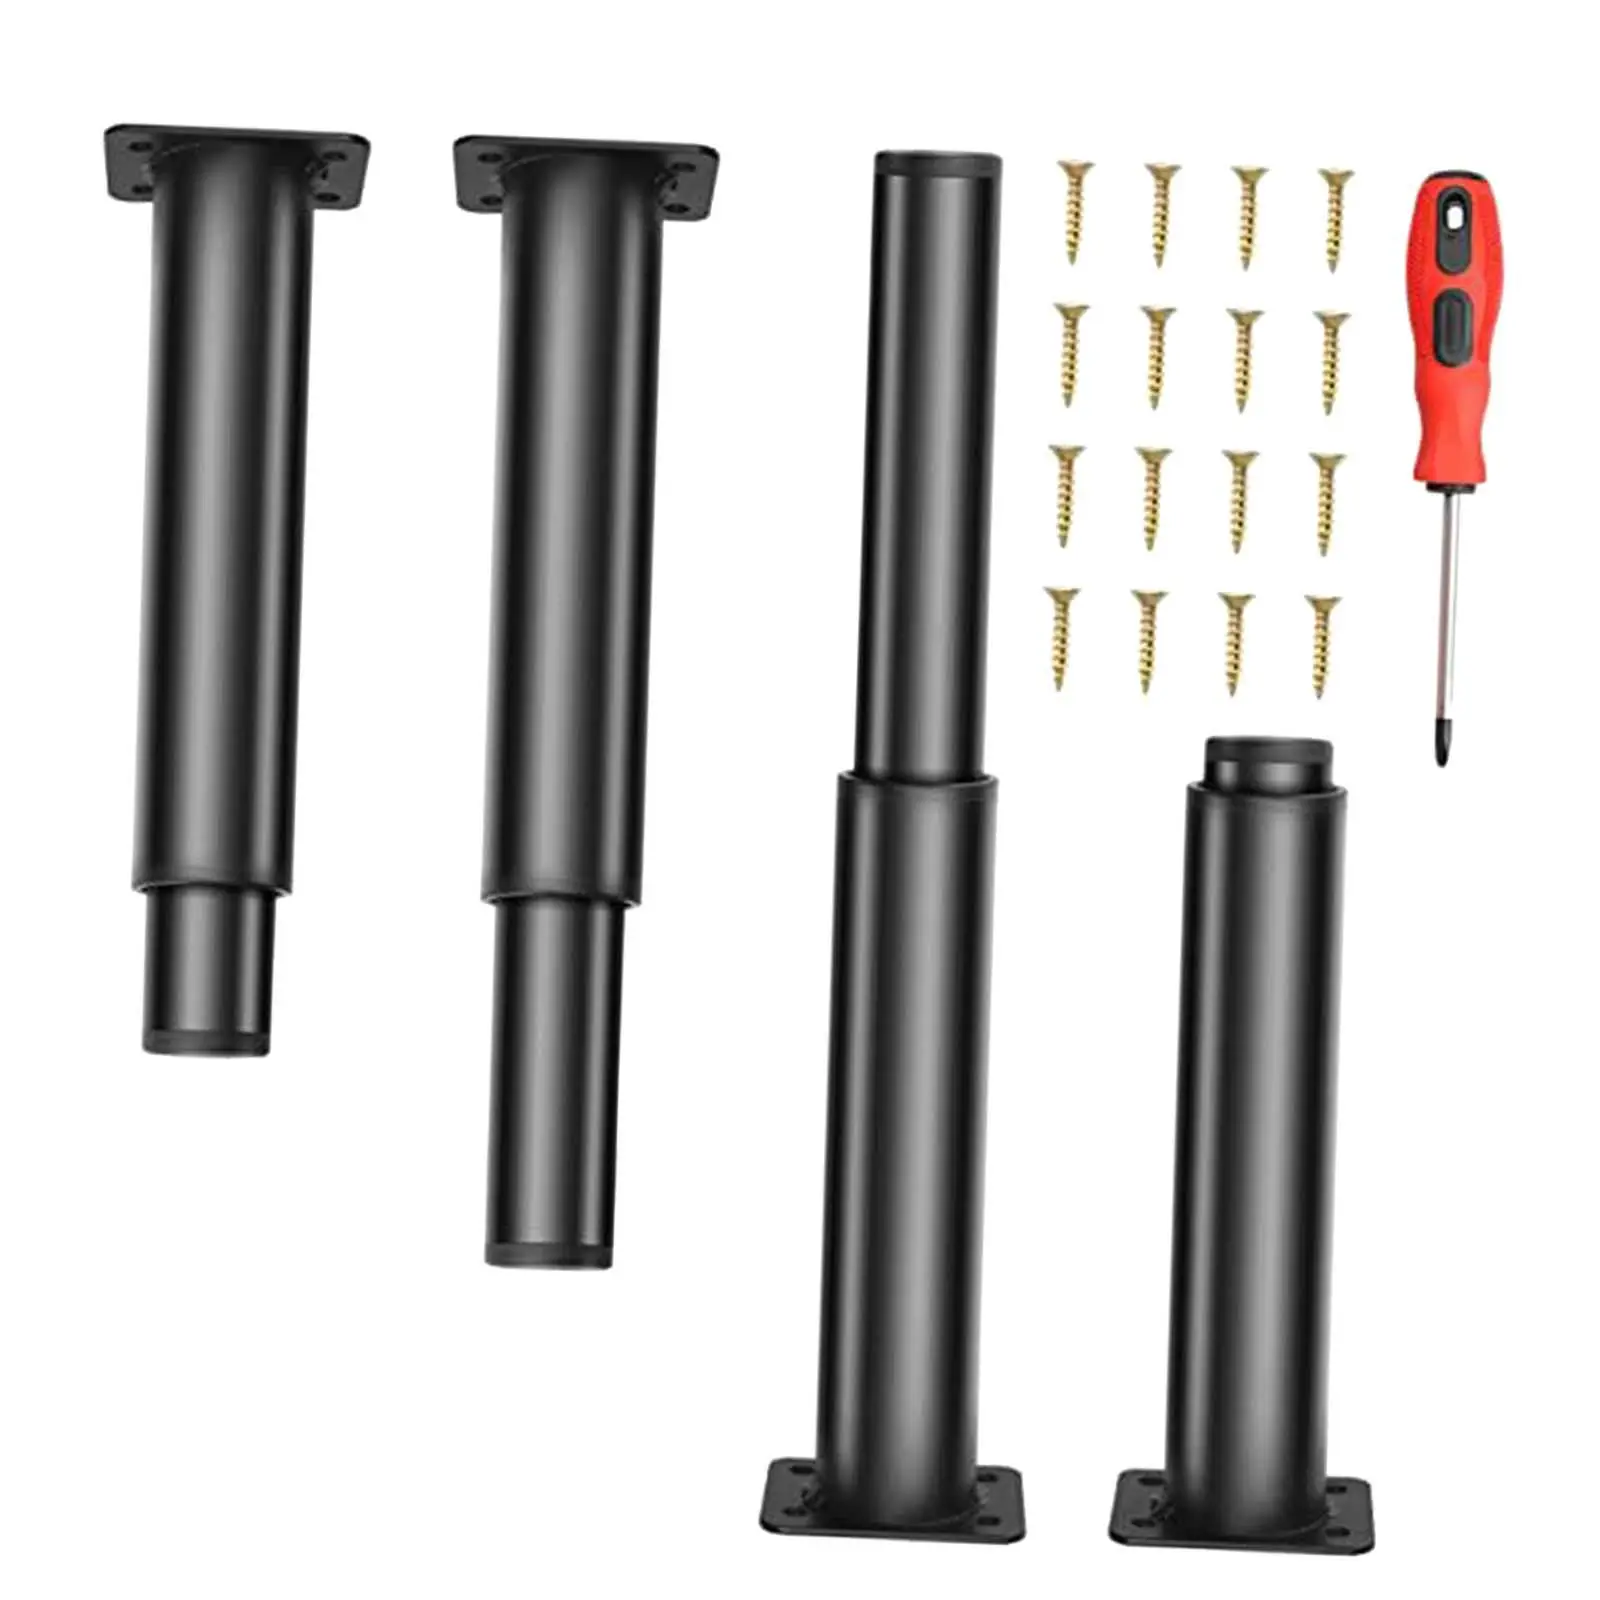 4x Adjustable Height Replacement Leg Black Heavy Duty Bed Frame Fixed Support Feet for Desk Bed Cabinet TV Stand Coffee Table